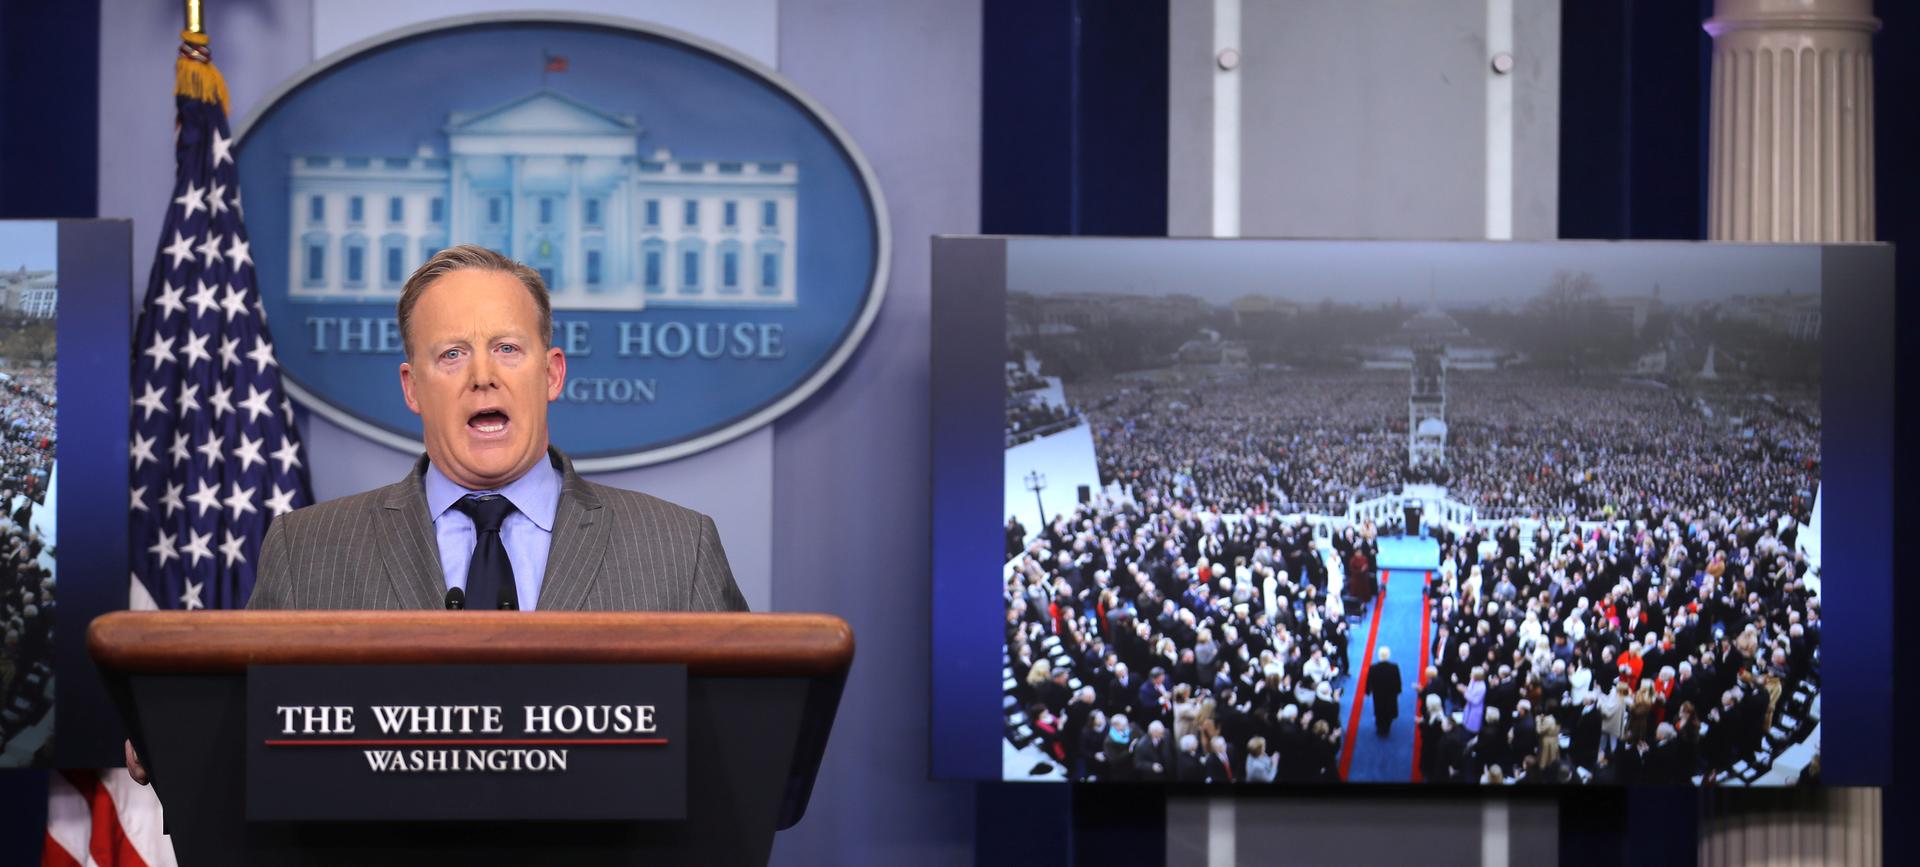 Press Secretary Sean Spicer delivers a statement while television screen show a picture of U.S. President Donald Trump's inauguration